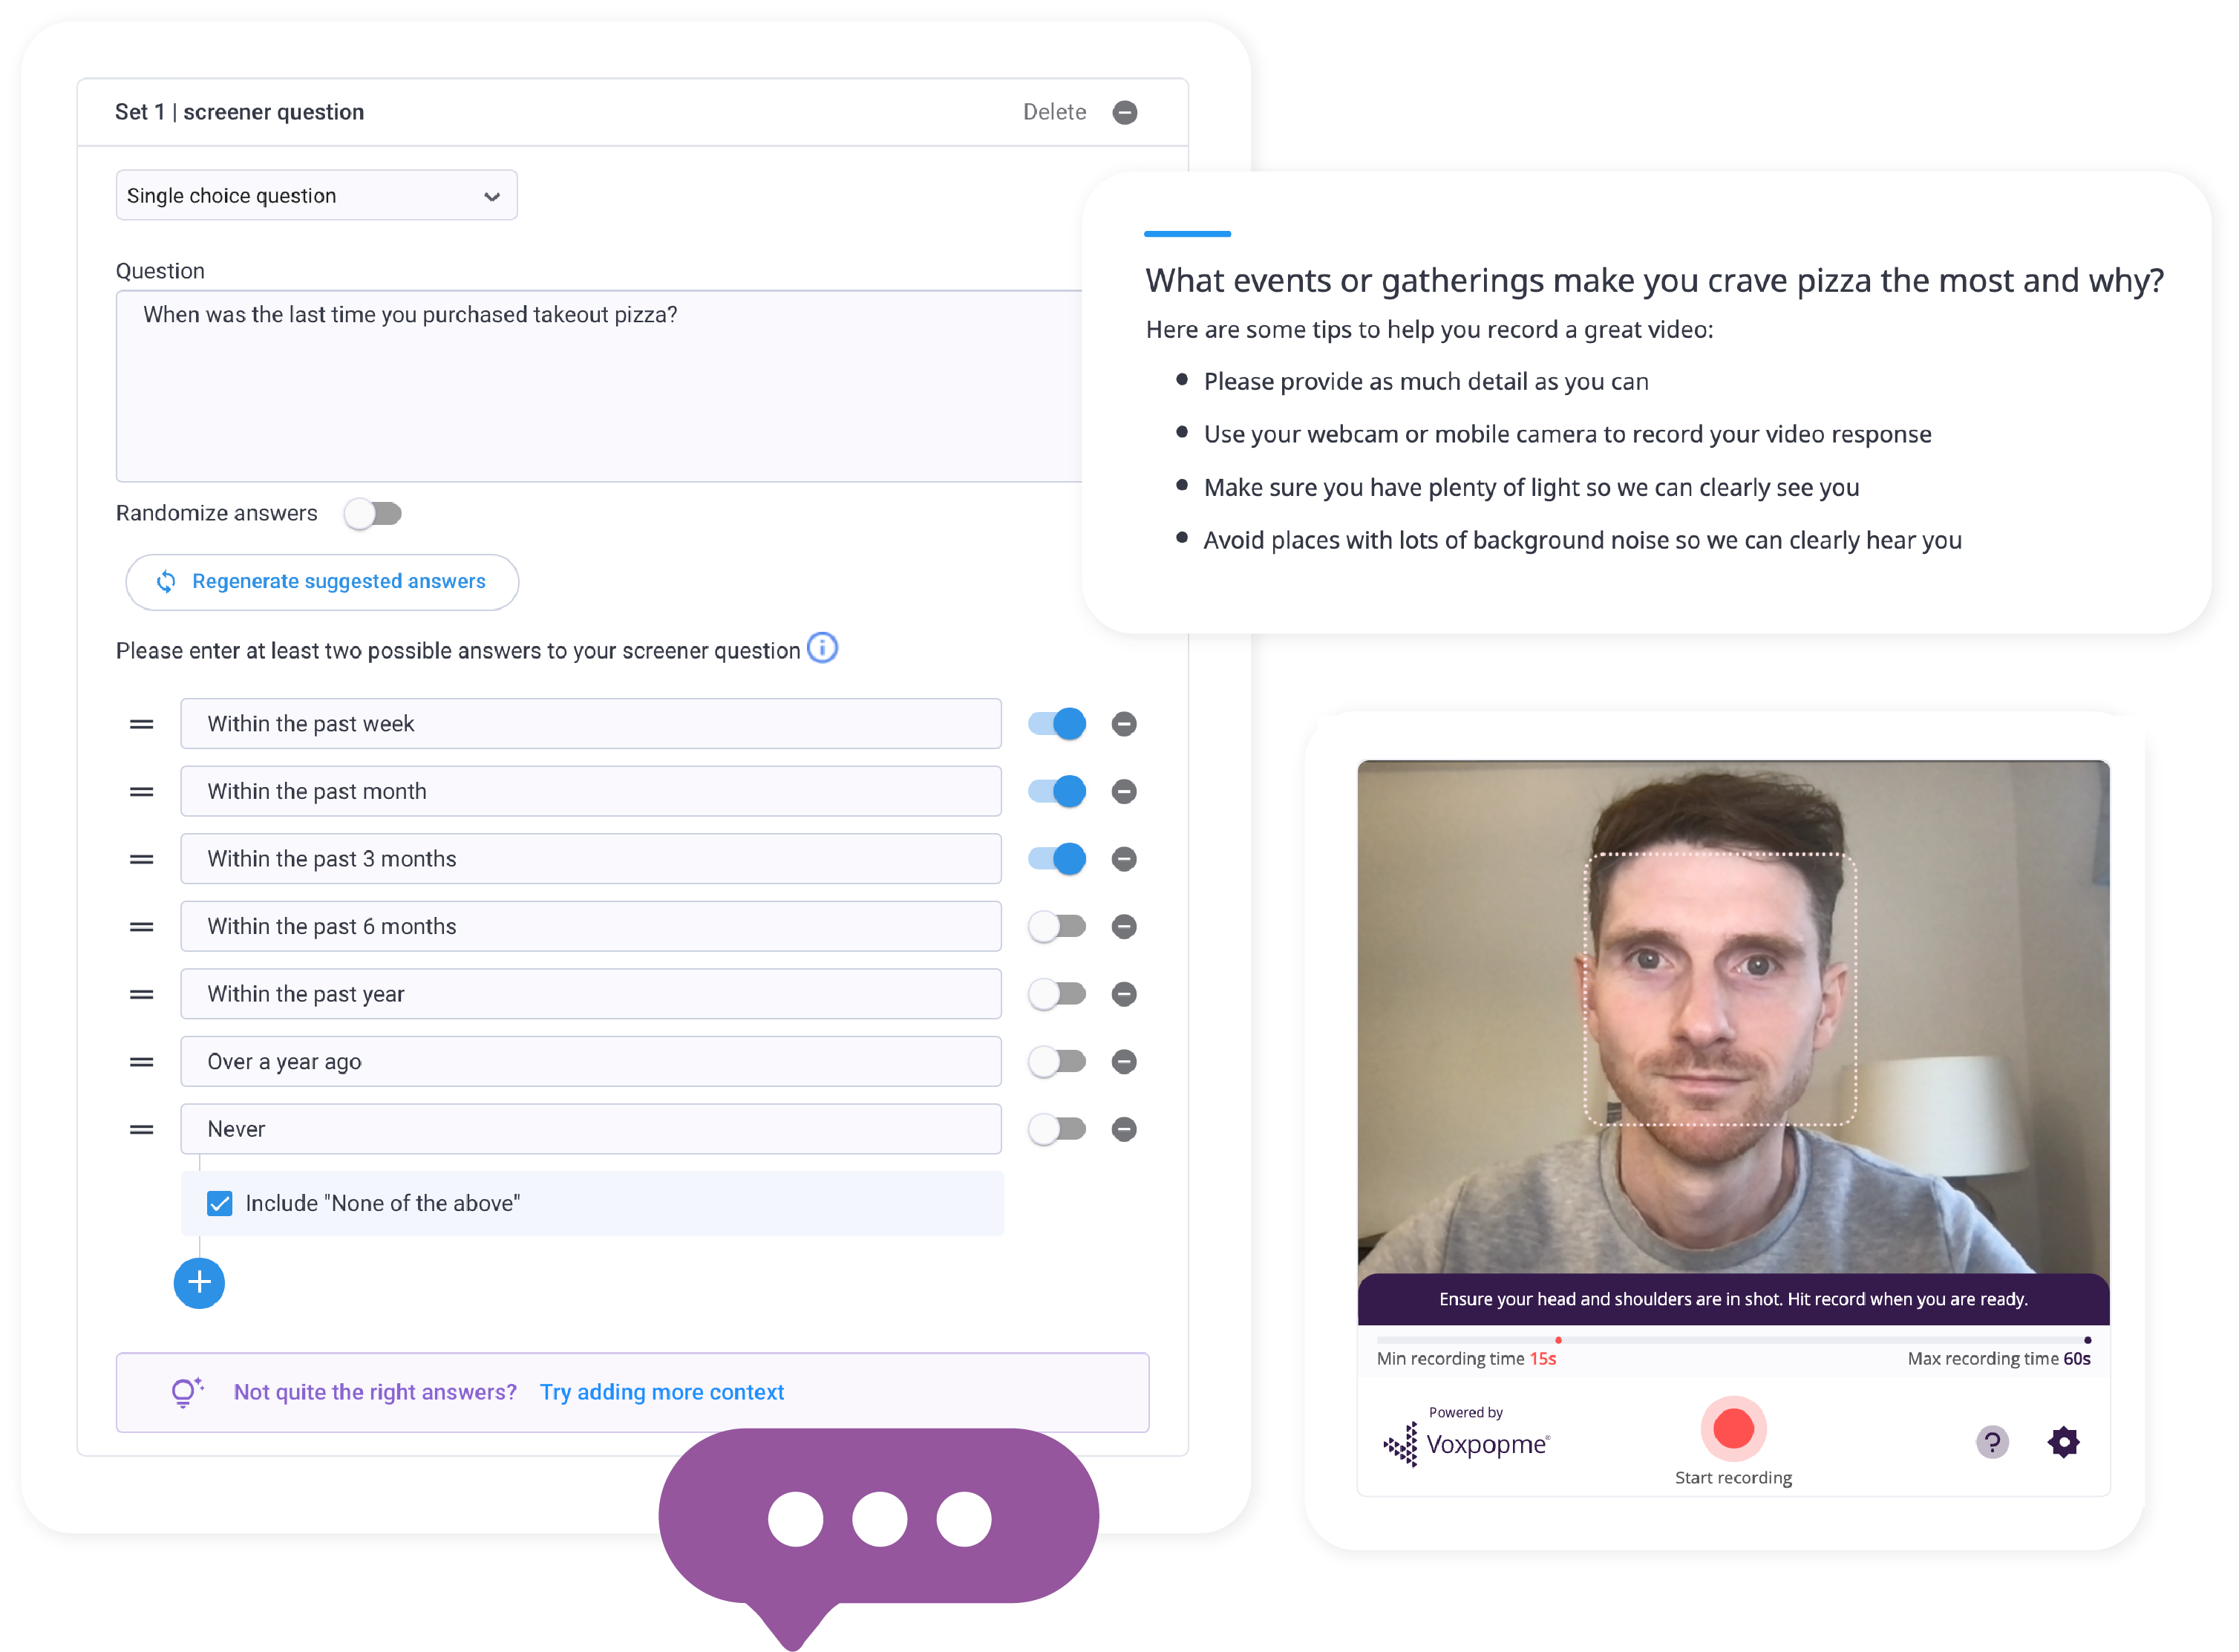 A screen featuring a man's face on it, showcasing the Voxpopme features.